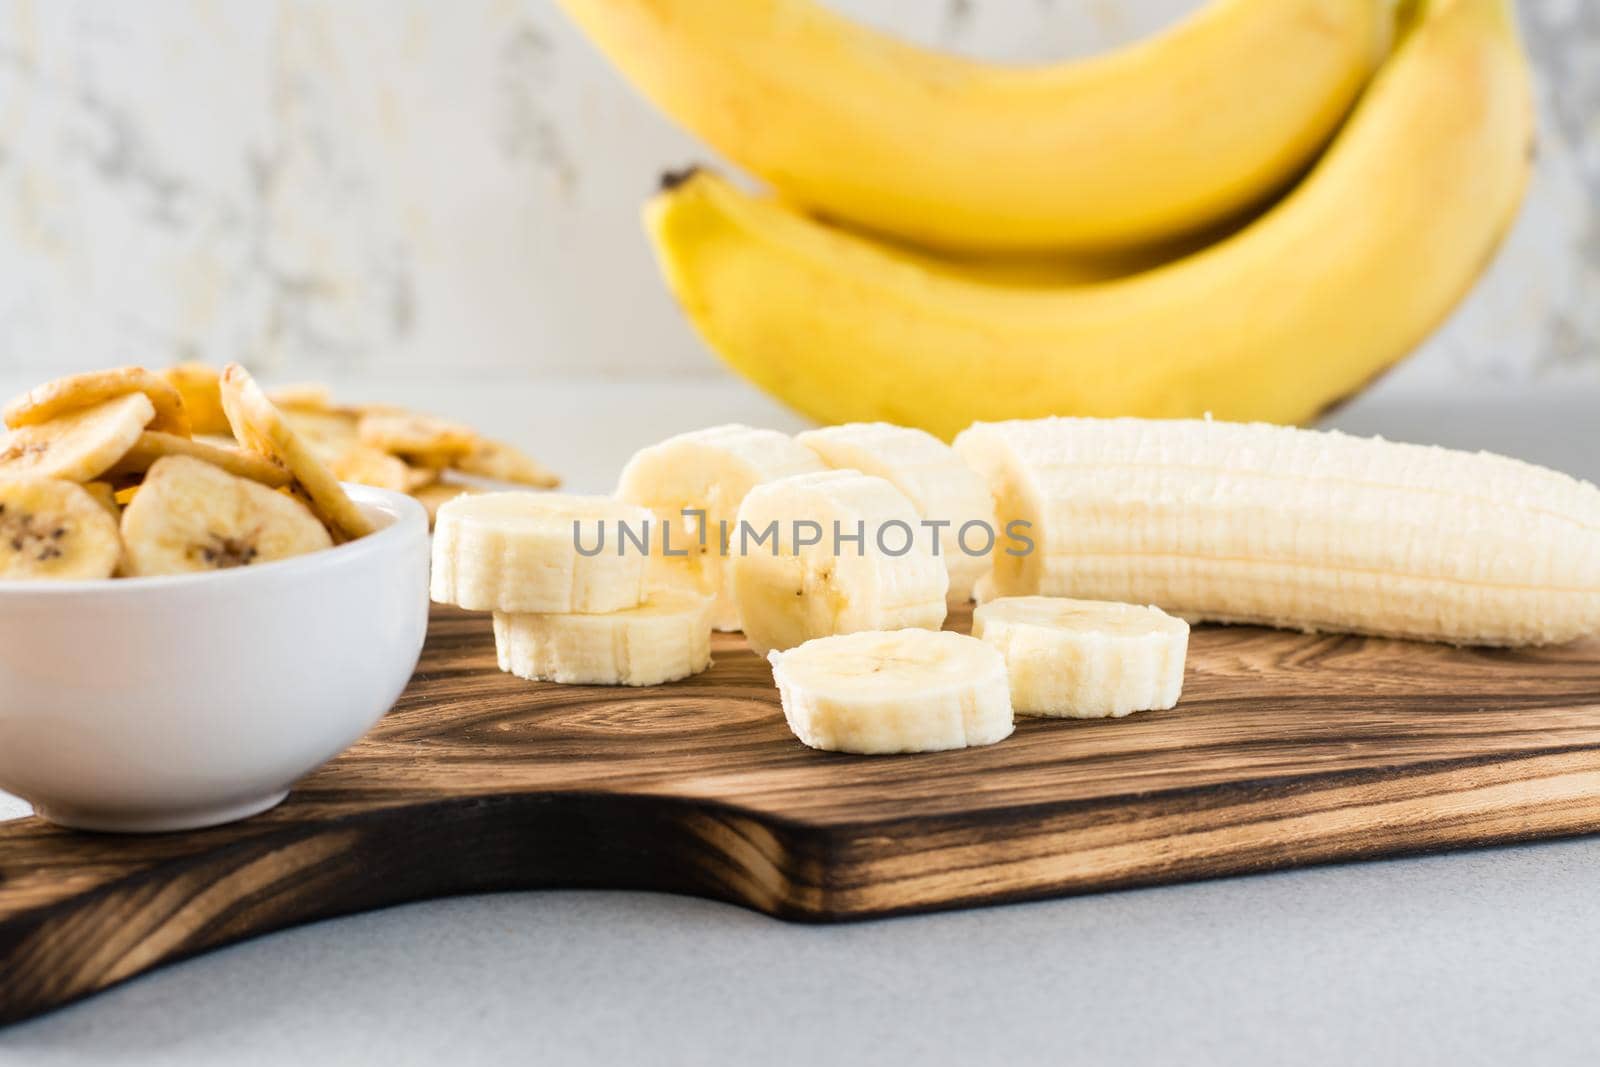 Banana slices on a cutting board and banana chips in a bowl on the table. Fast food.